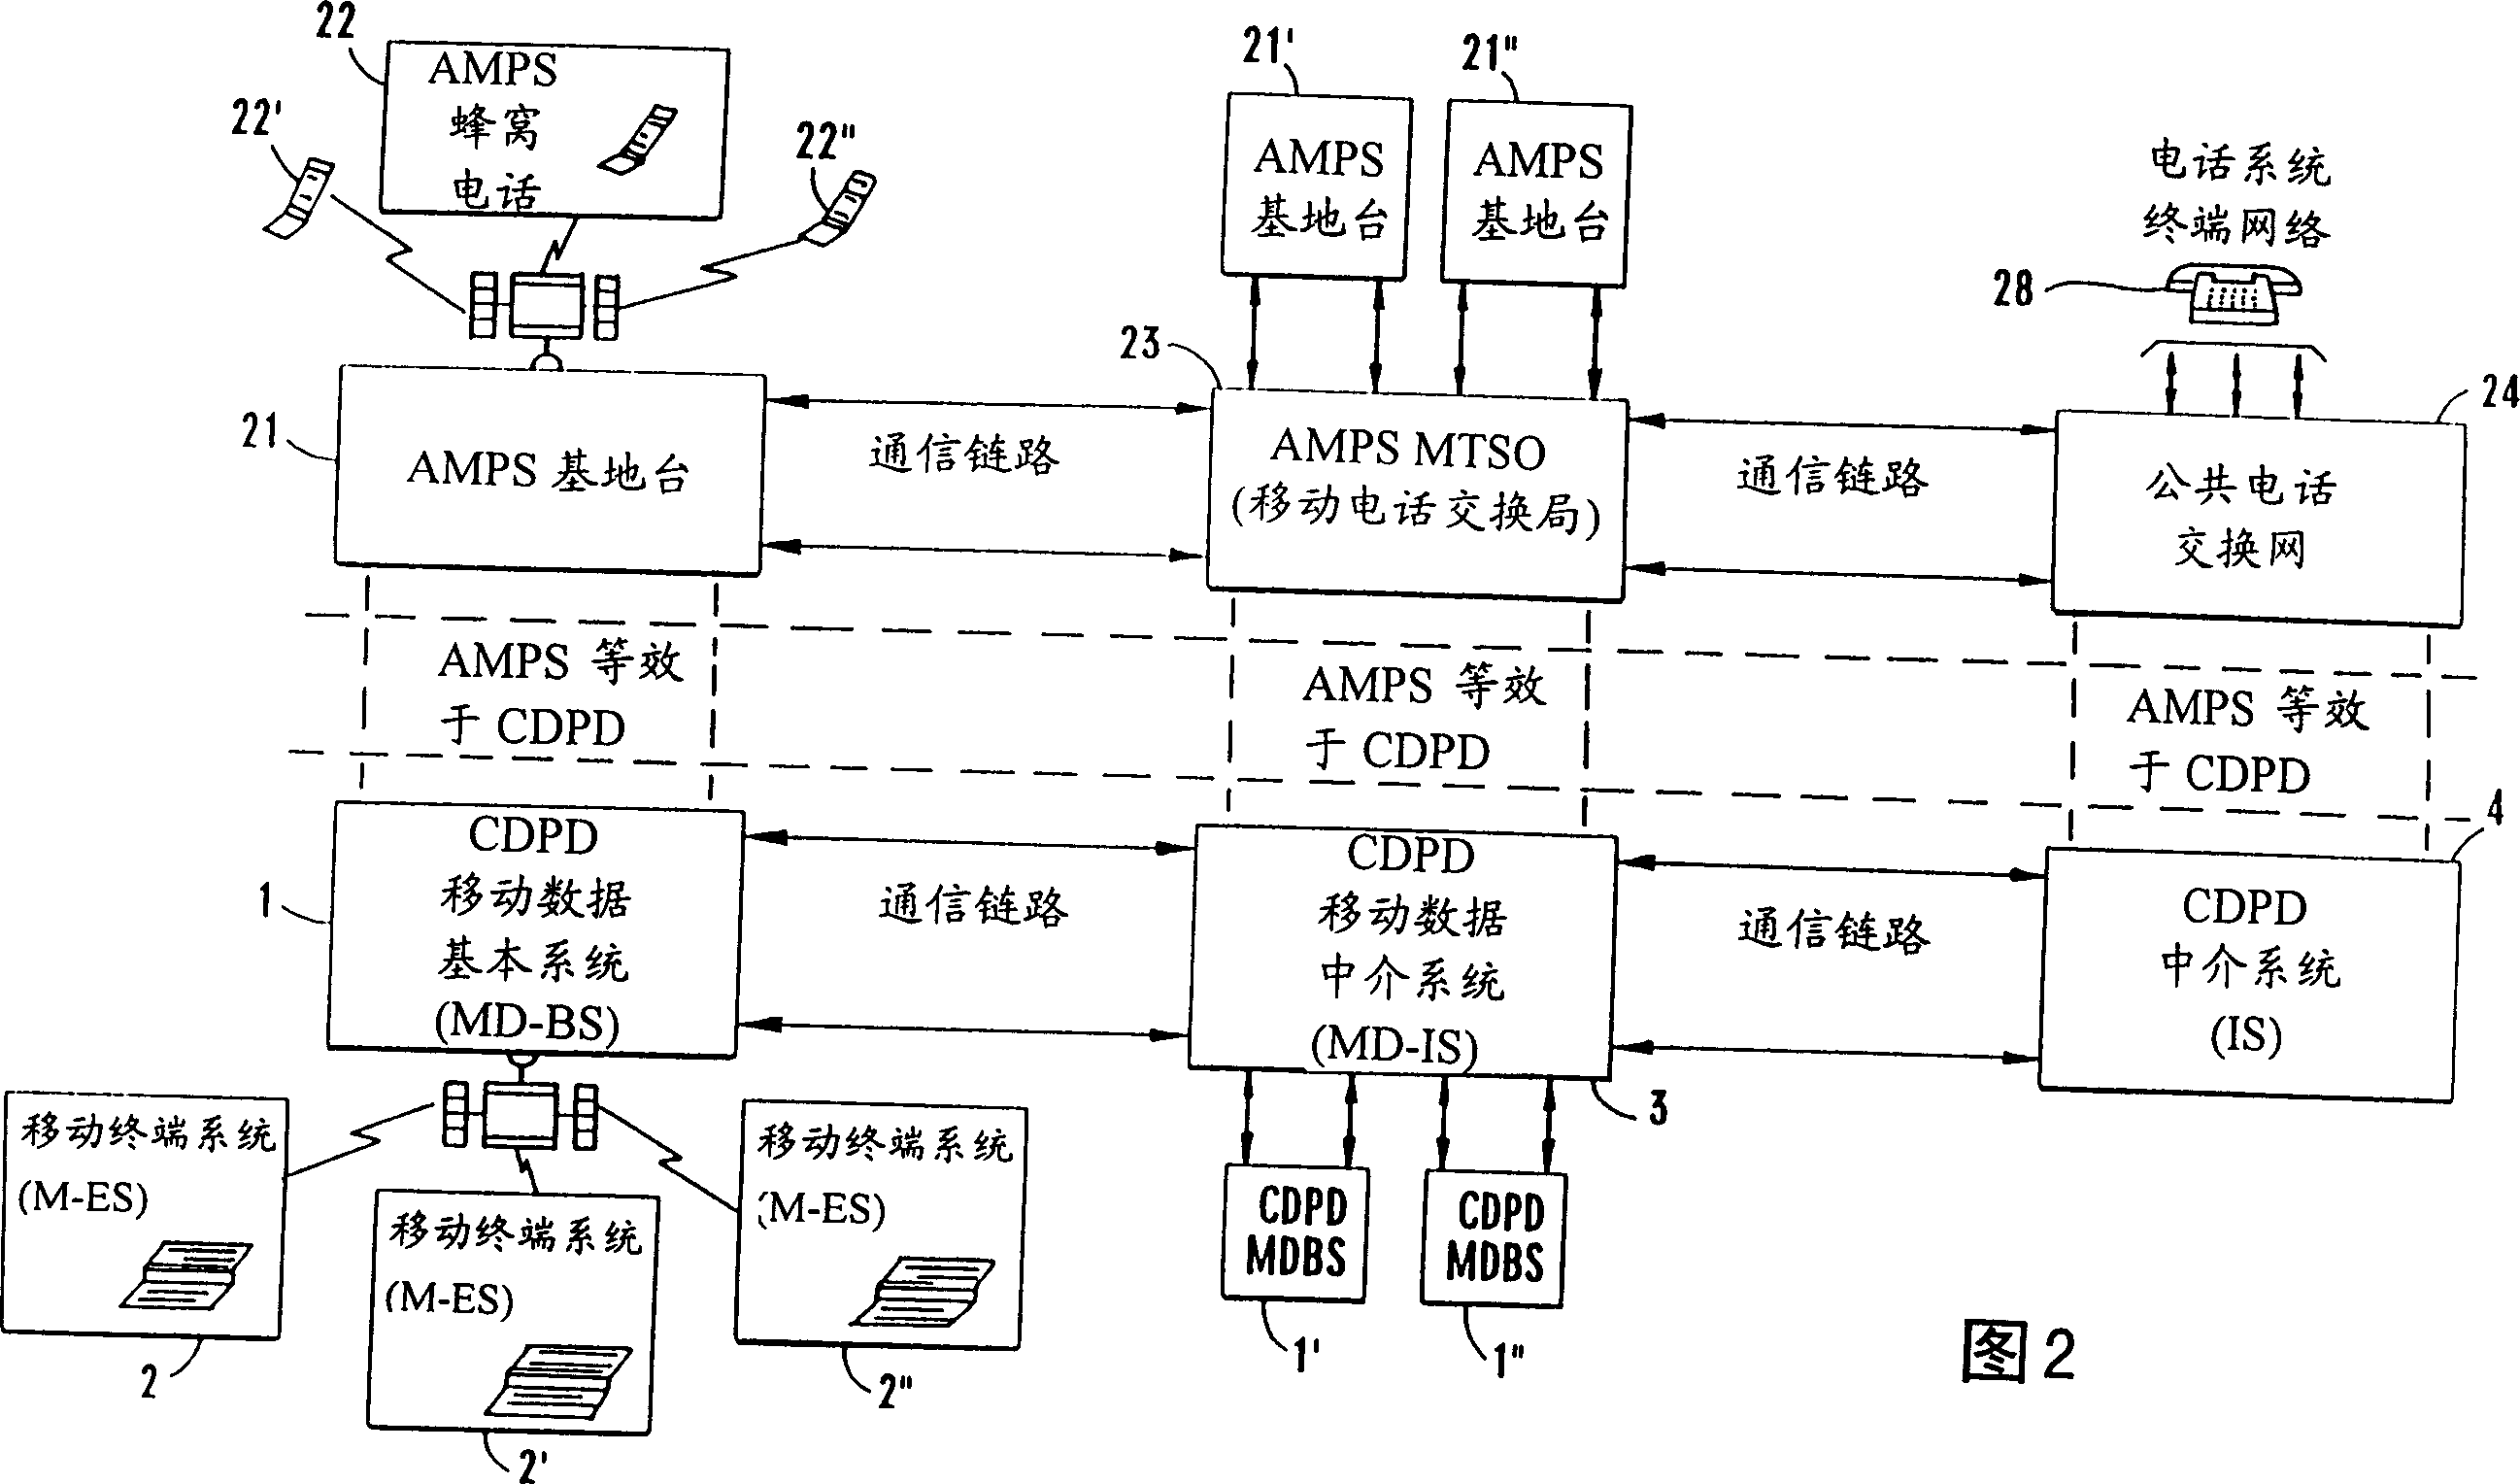 Method and apparatus for reduced power consumption in mobile packet data communication system